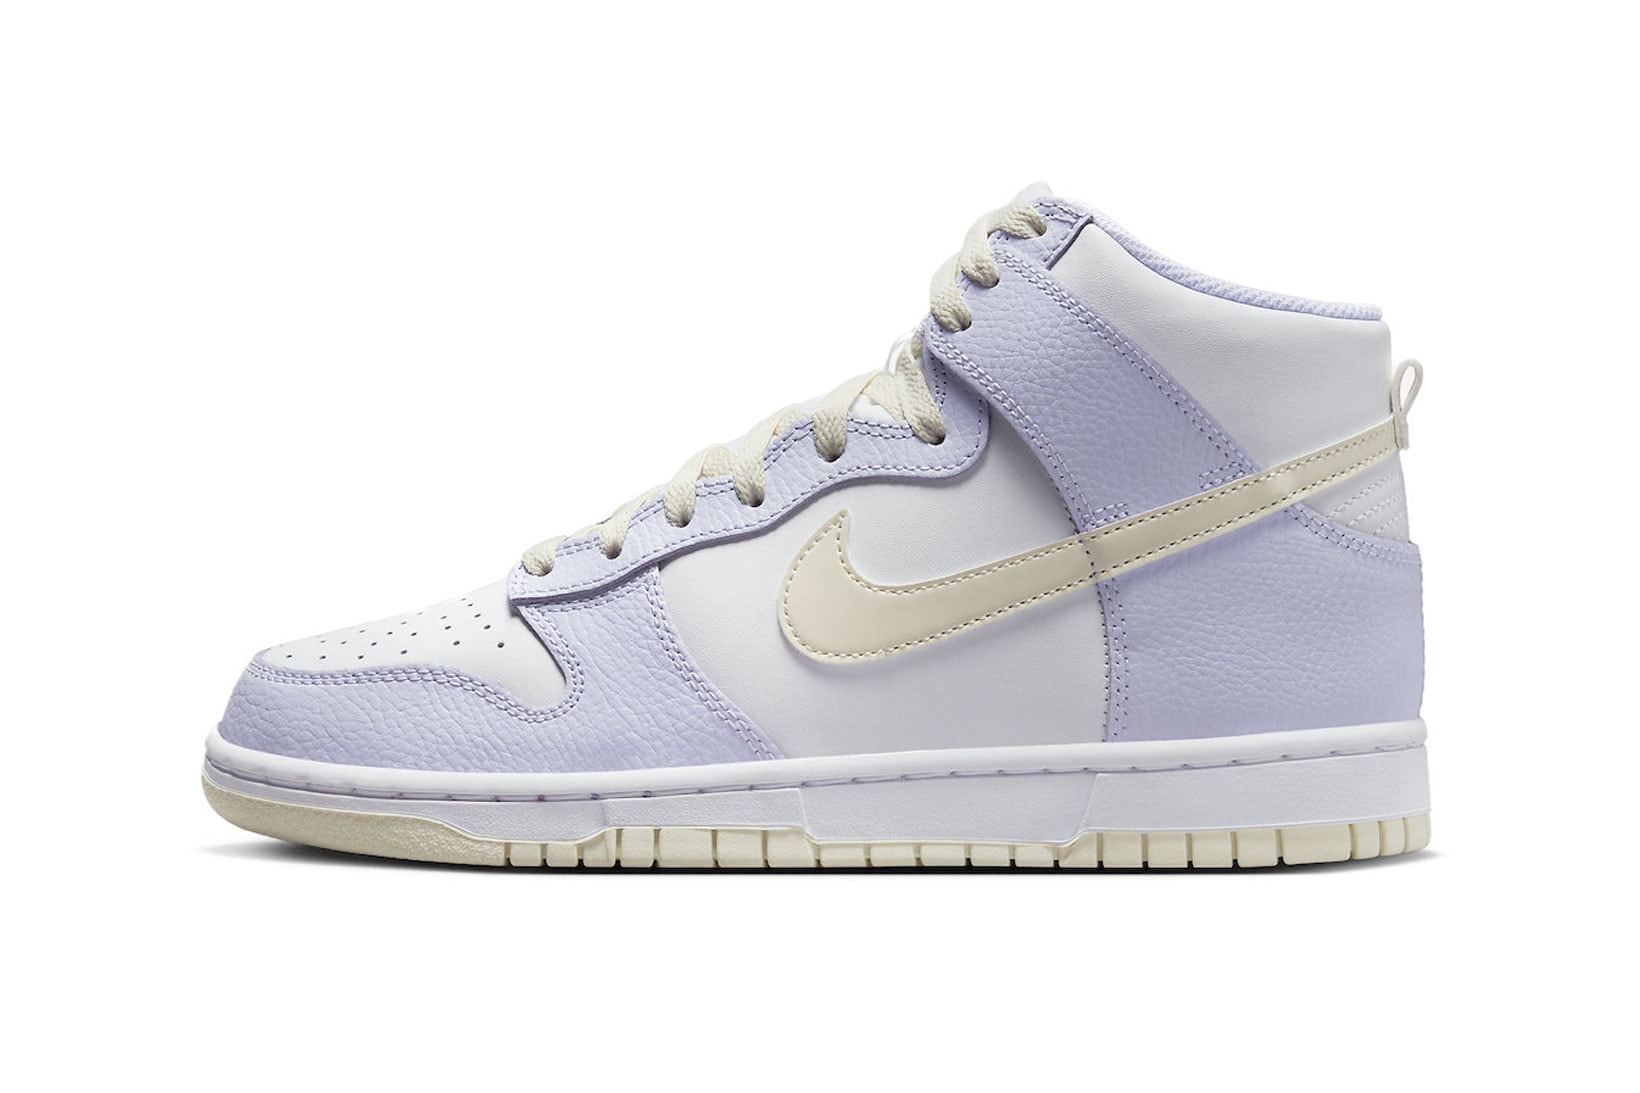 Nike Dunk High Oxygen Purple Womens Exclusive Coconut Milk Release Images